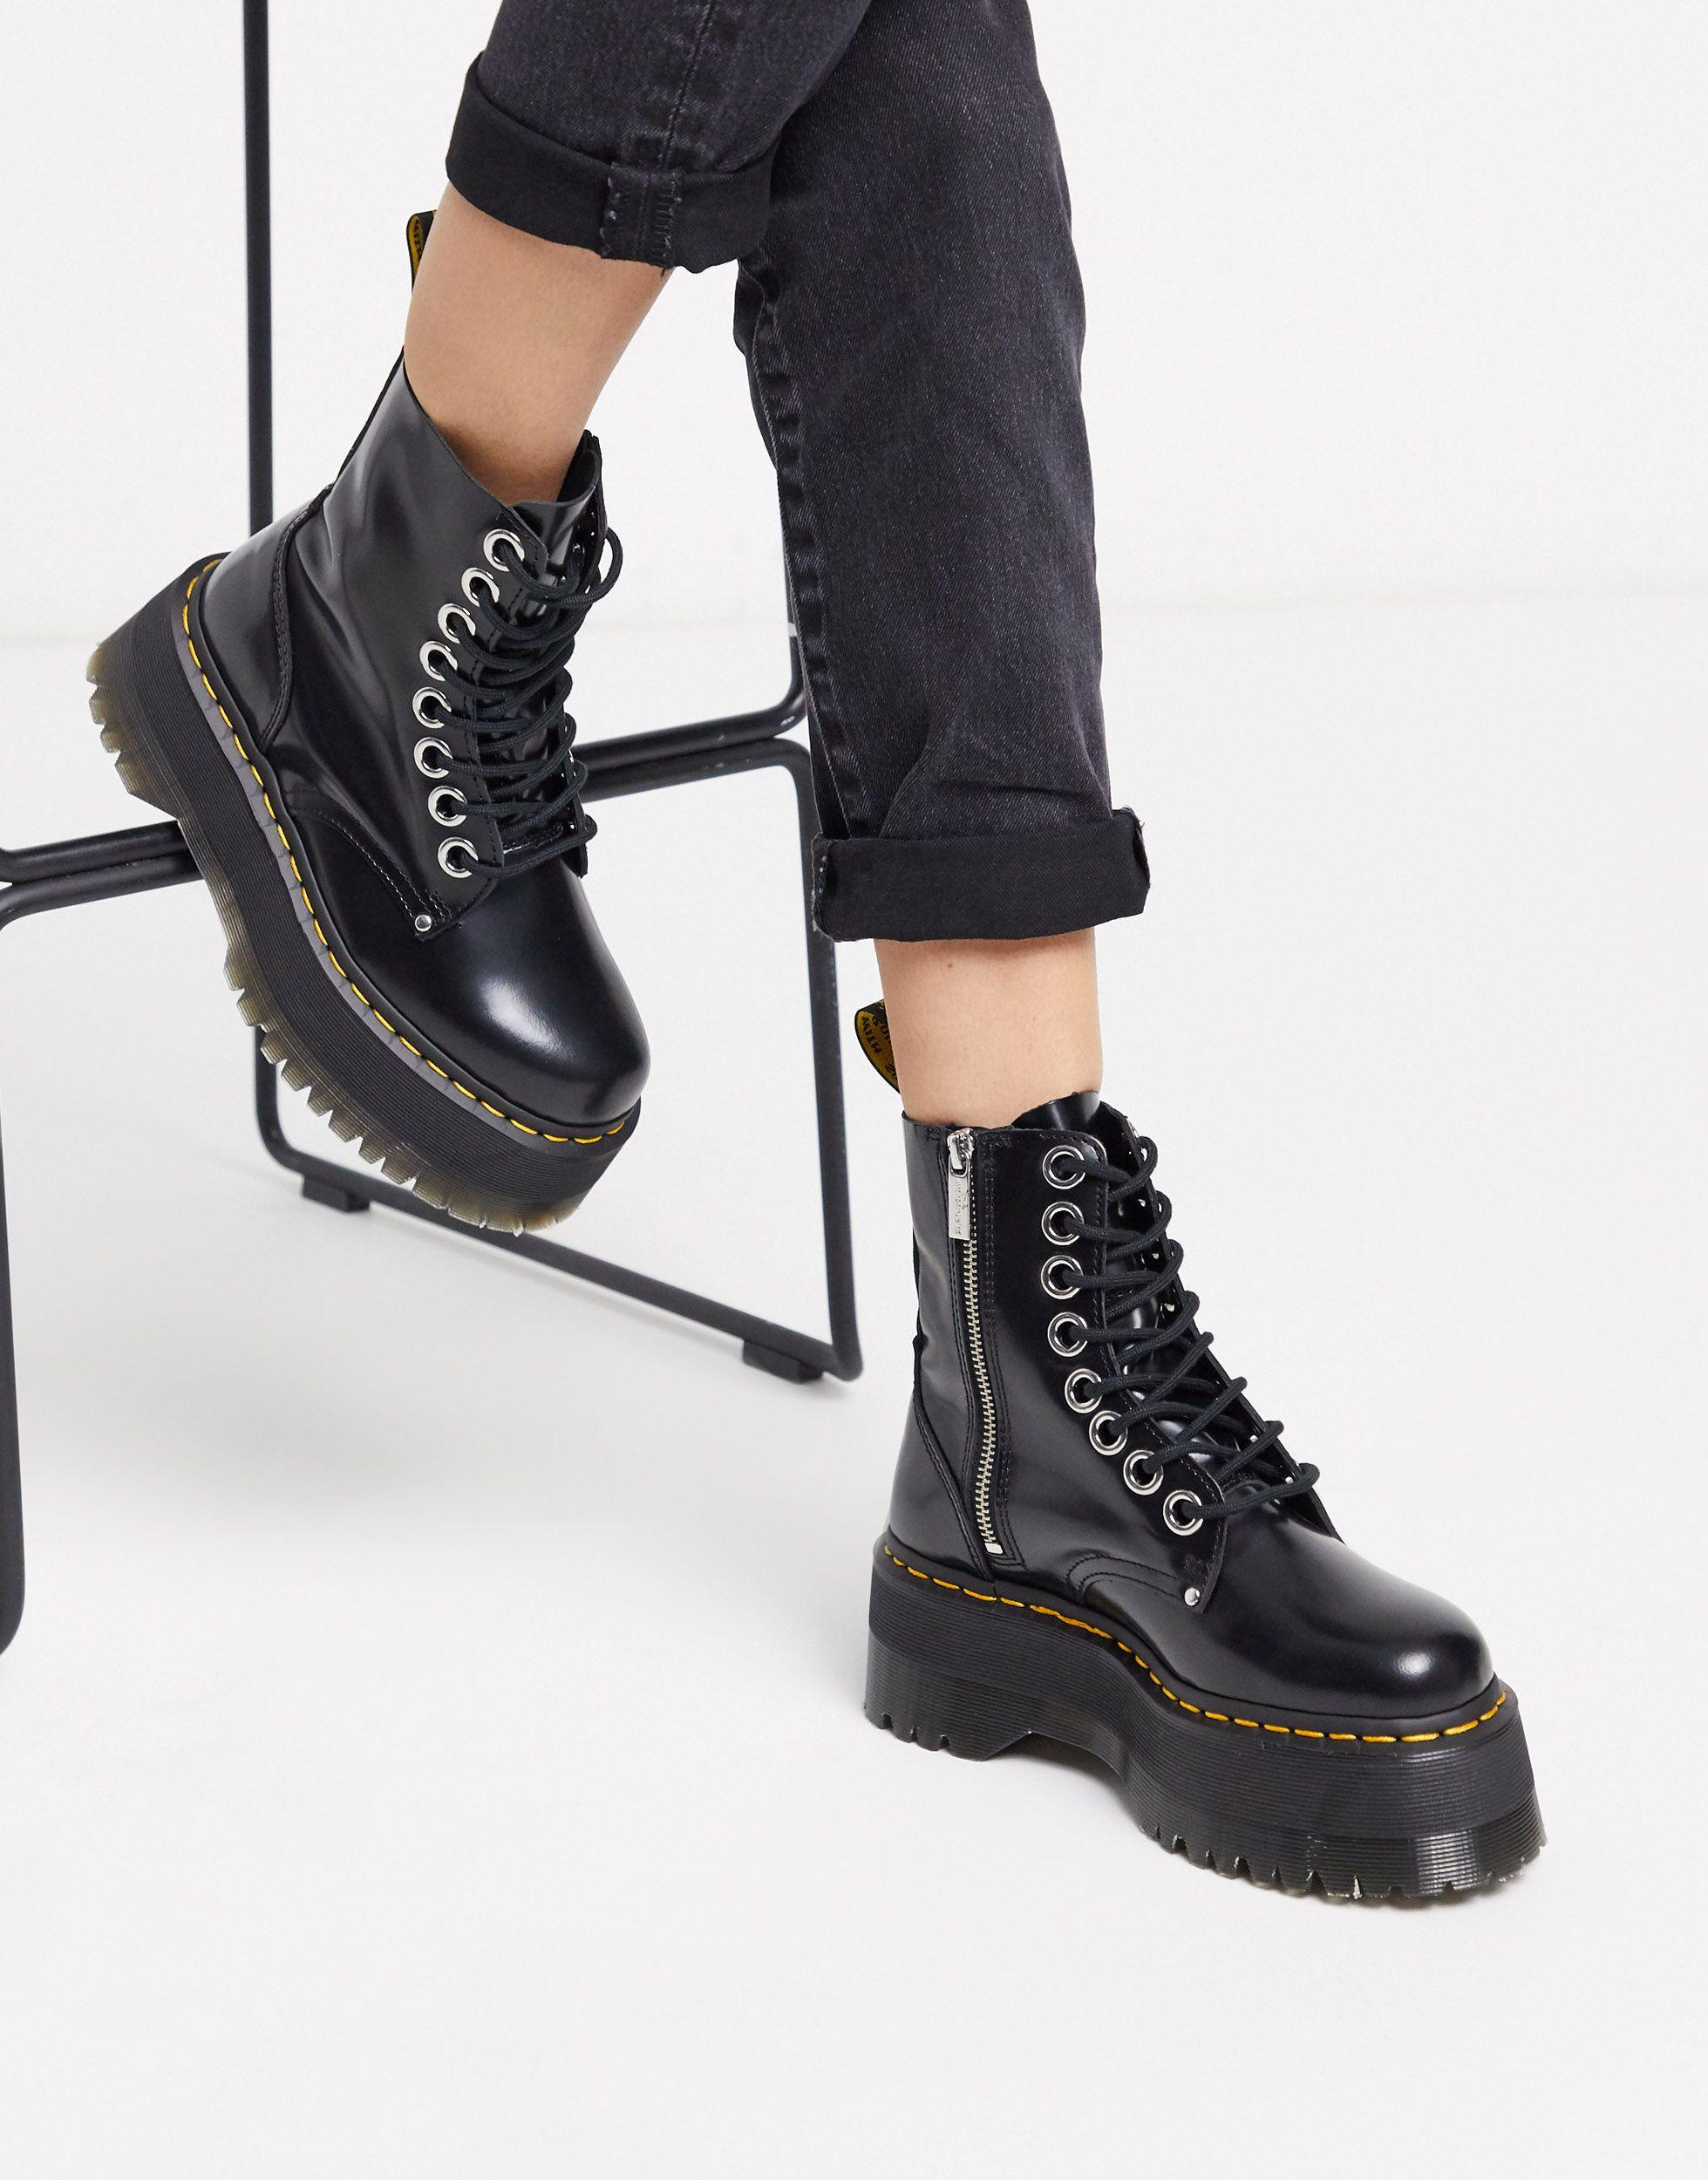 How to style Dr. Martens | everysize Blog